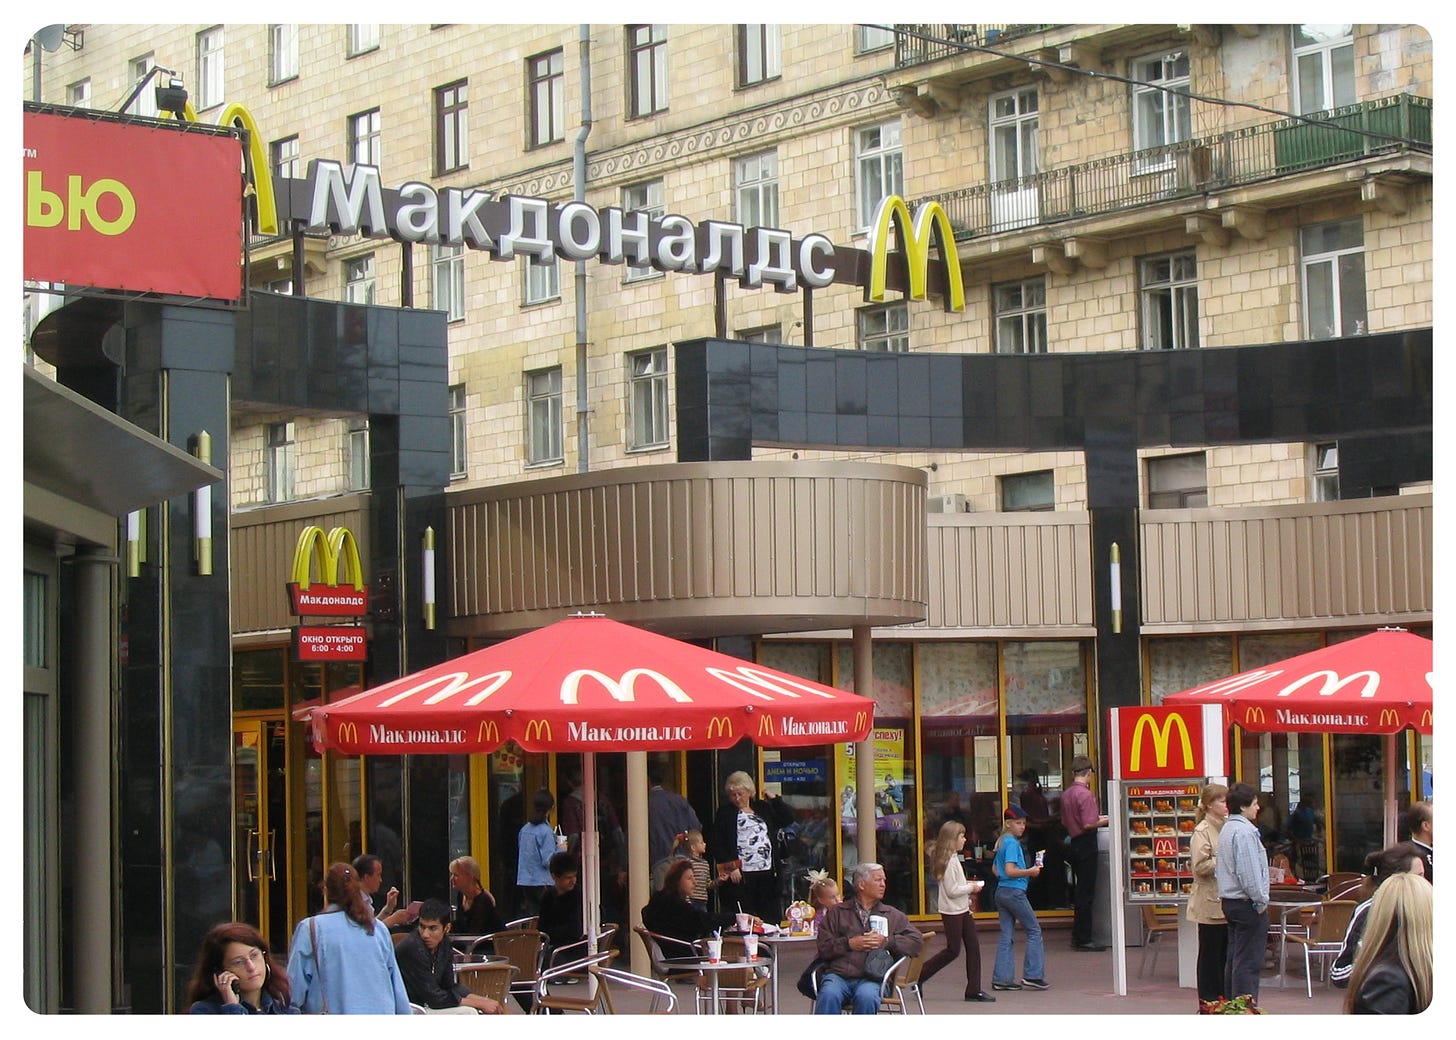 A picture of a McDonalds somewhere in Eastern Europe, sometime in the 90s. Used by Khan in an article that depicts 1990s Globilisation